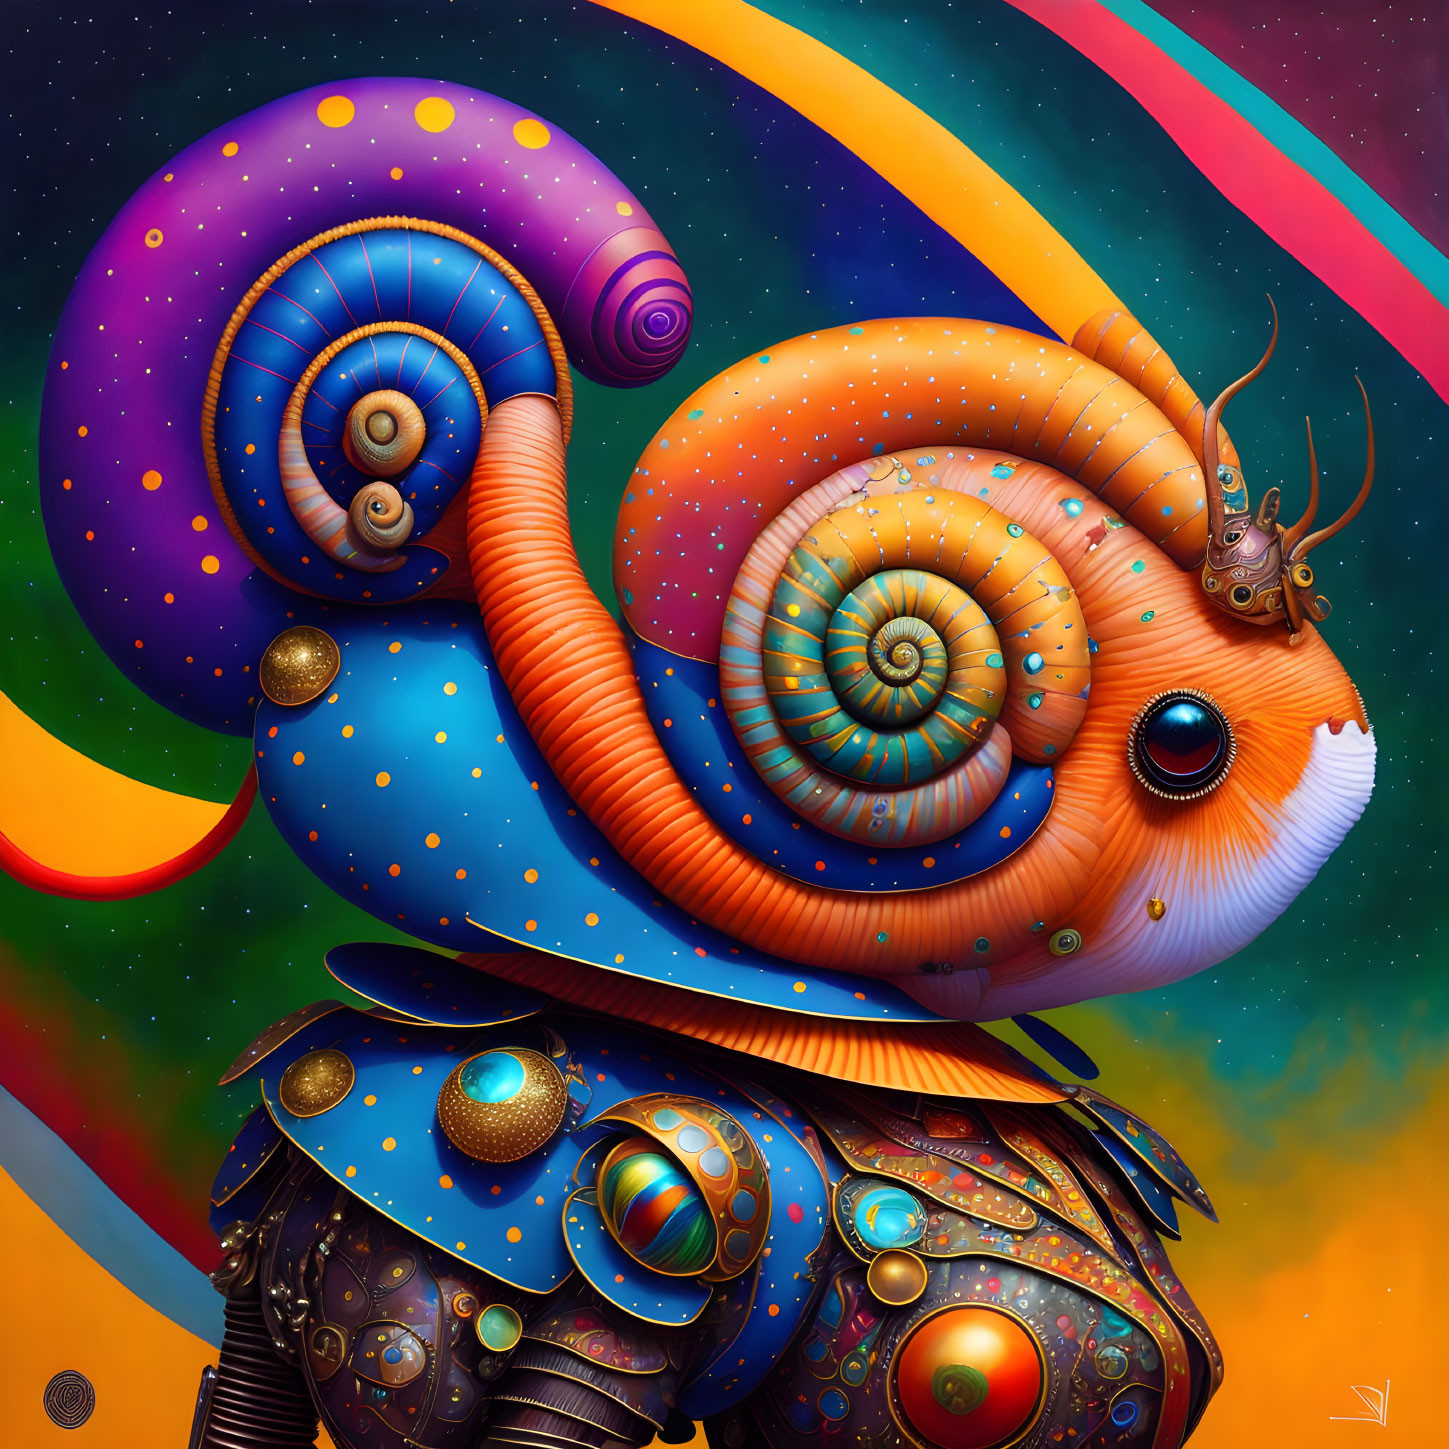 Colorful whimsical snail on patterned shell rides mechanical turtle in cosmic scene